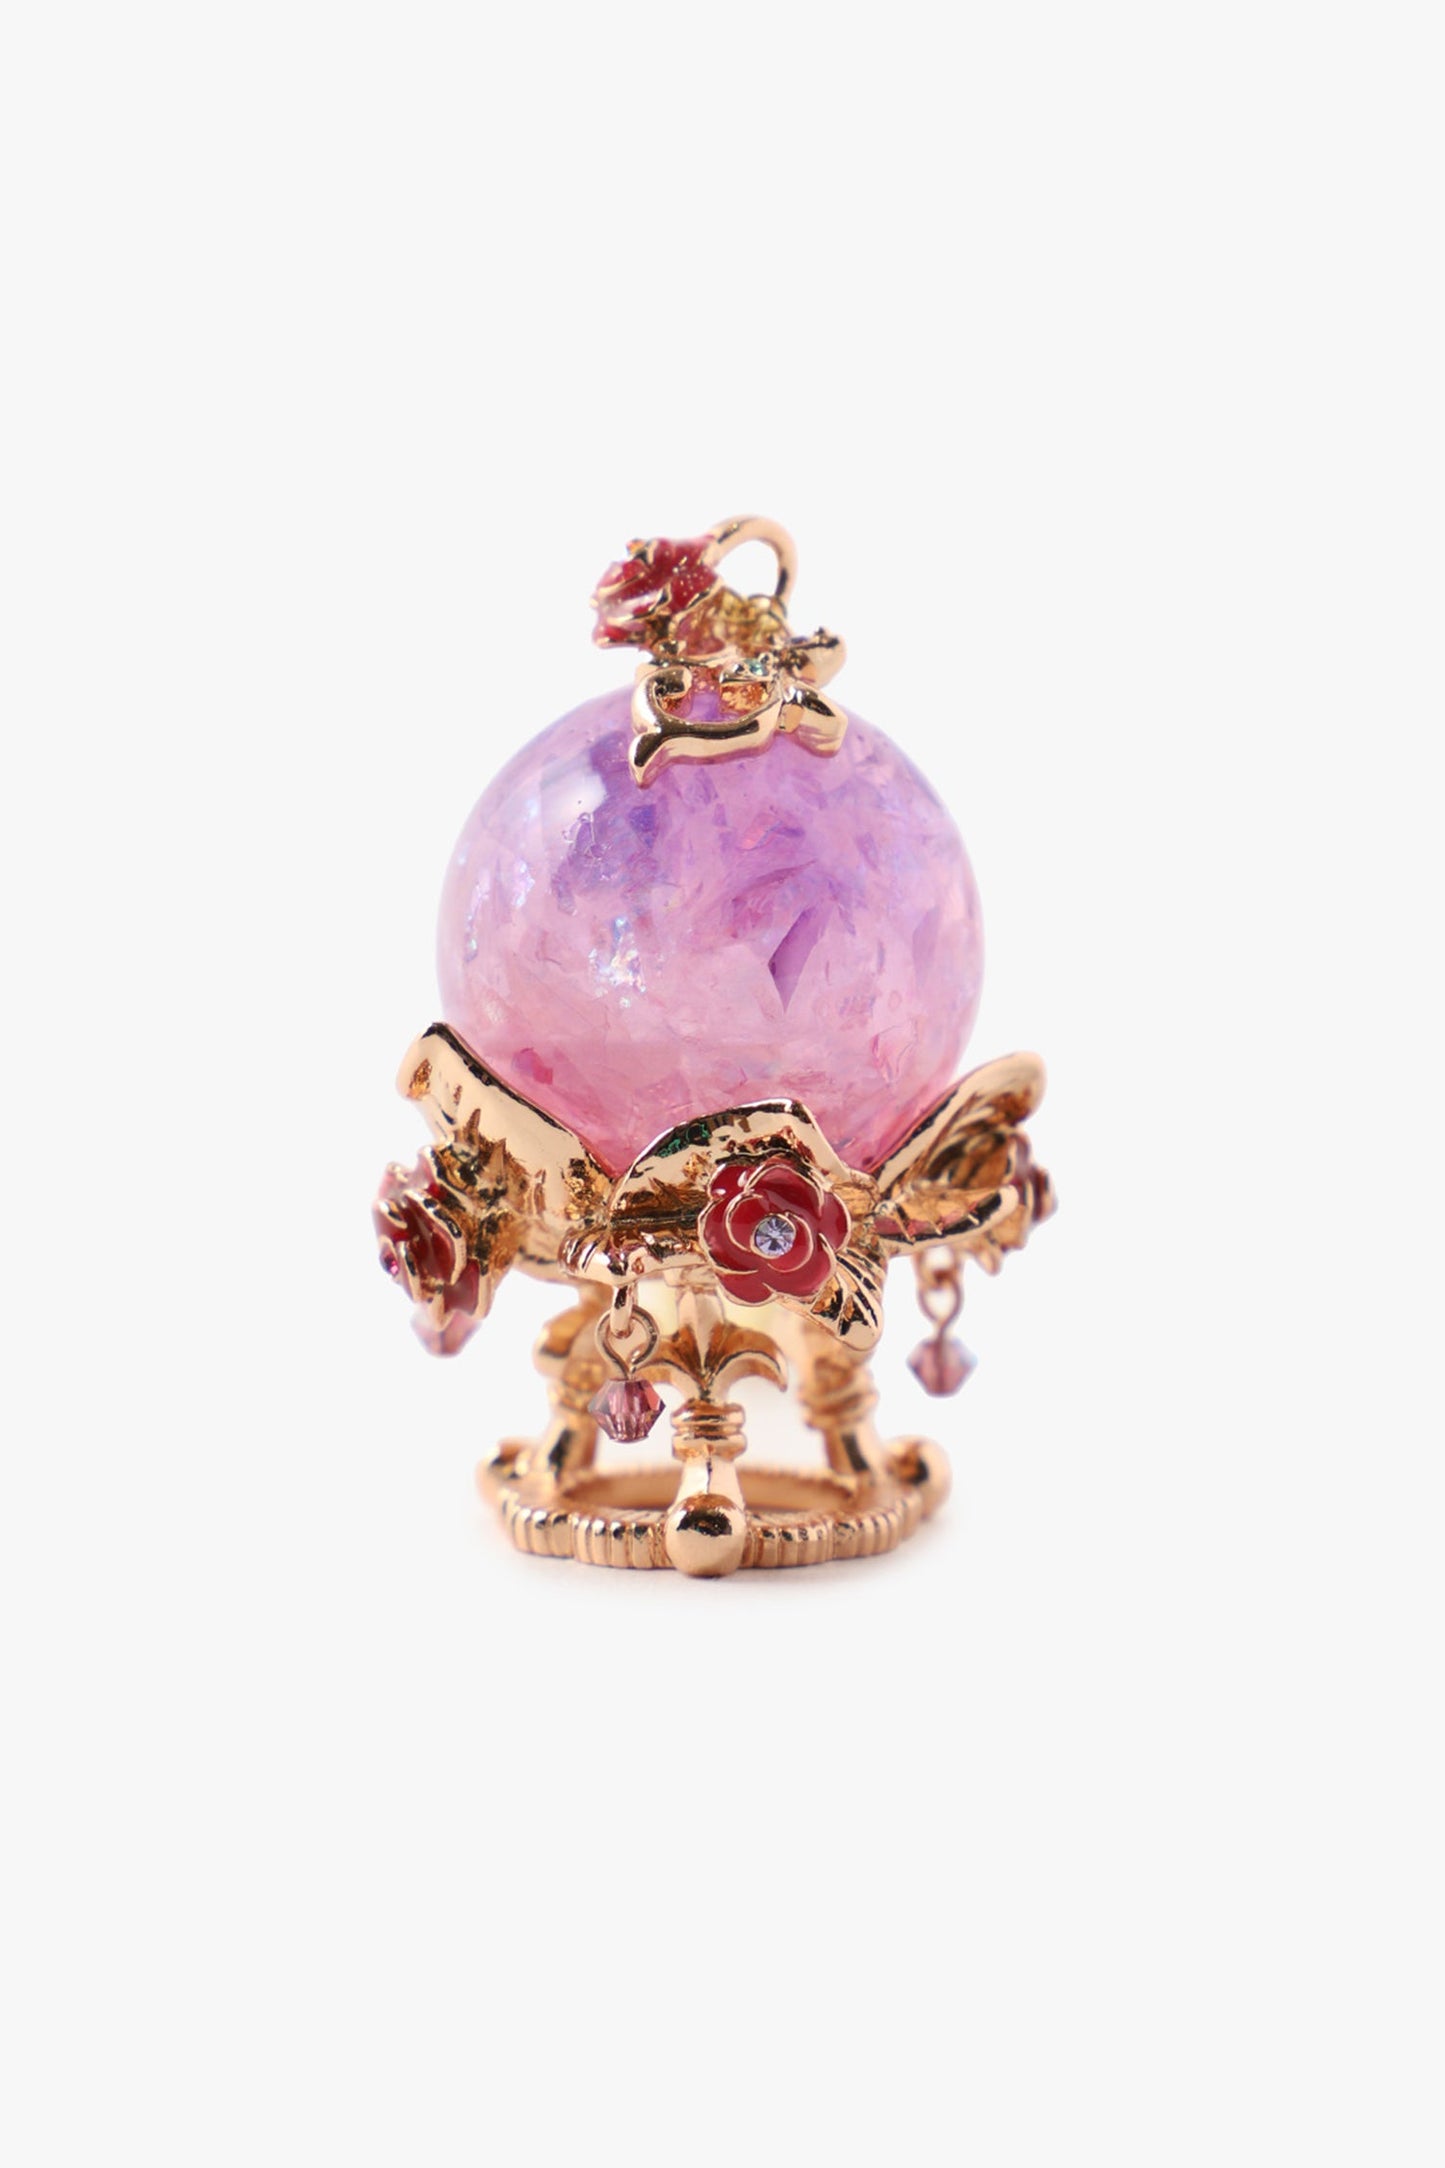 Pendant, Pink crystal ball with silver accents, a golden floral design  support the ball